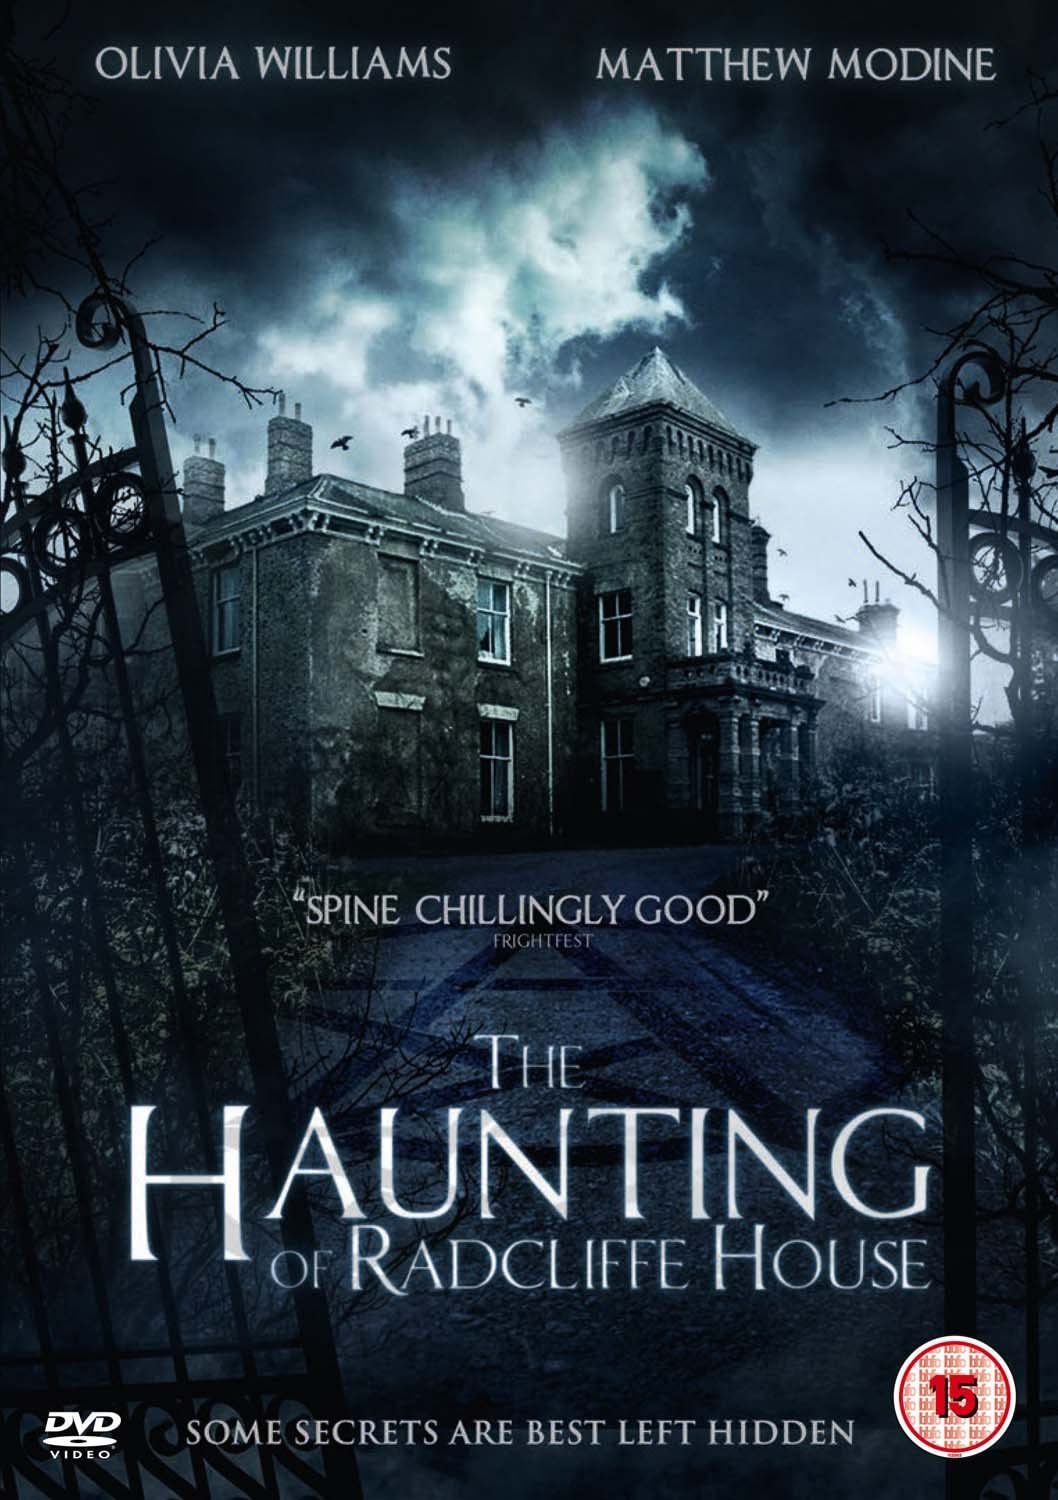 The Haunting of Radcliffe House - Horror/Mystery [DVD]